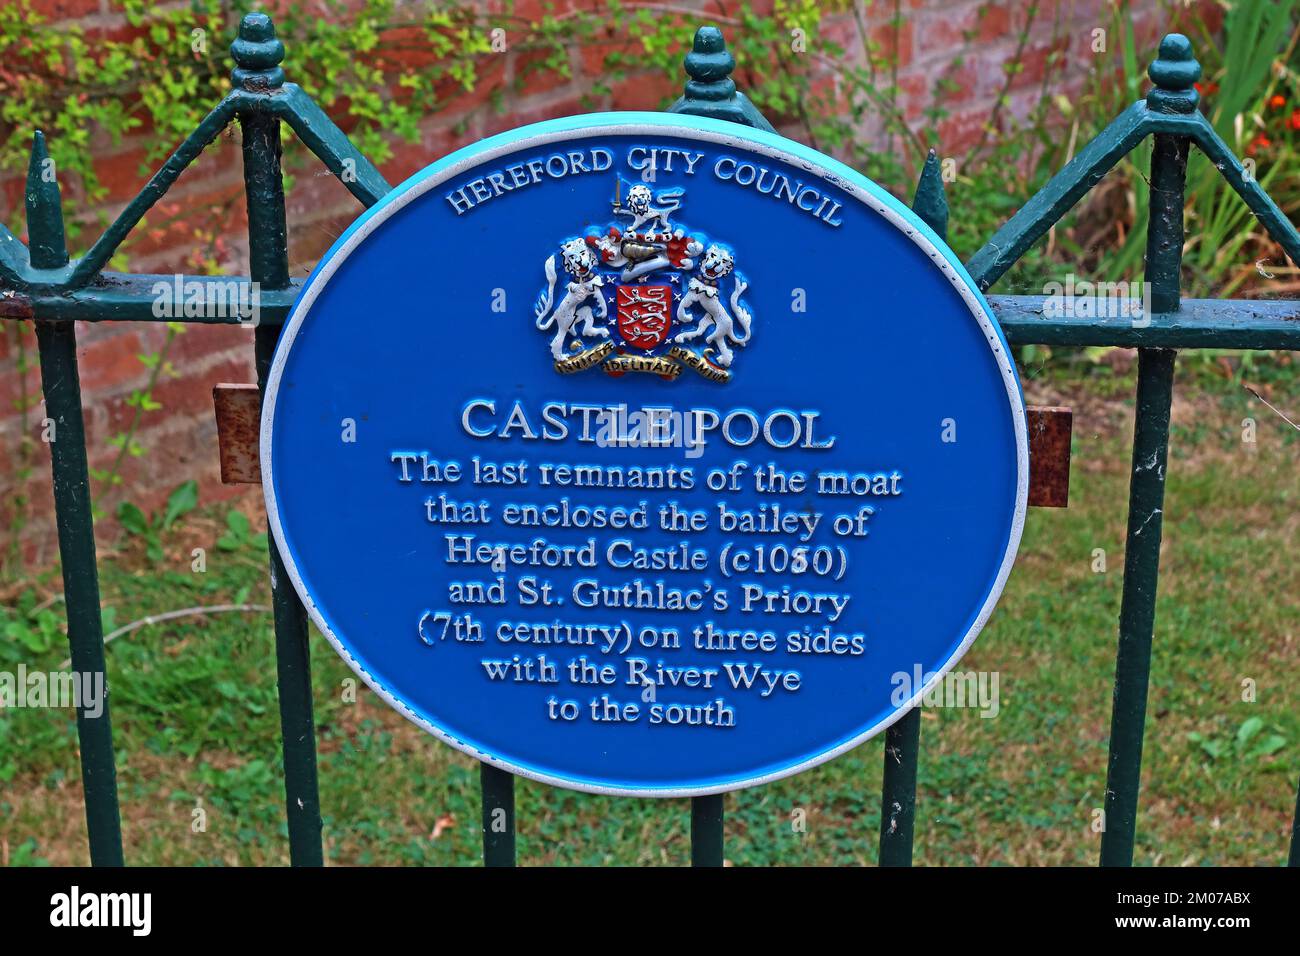 Castle Pool plaque, last remnants of enclosed Hereford Castle c1050 and St Guthlacs Priory, from Hereford City Council, off Castle Street, Hereford, Stock Photo